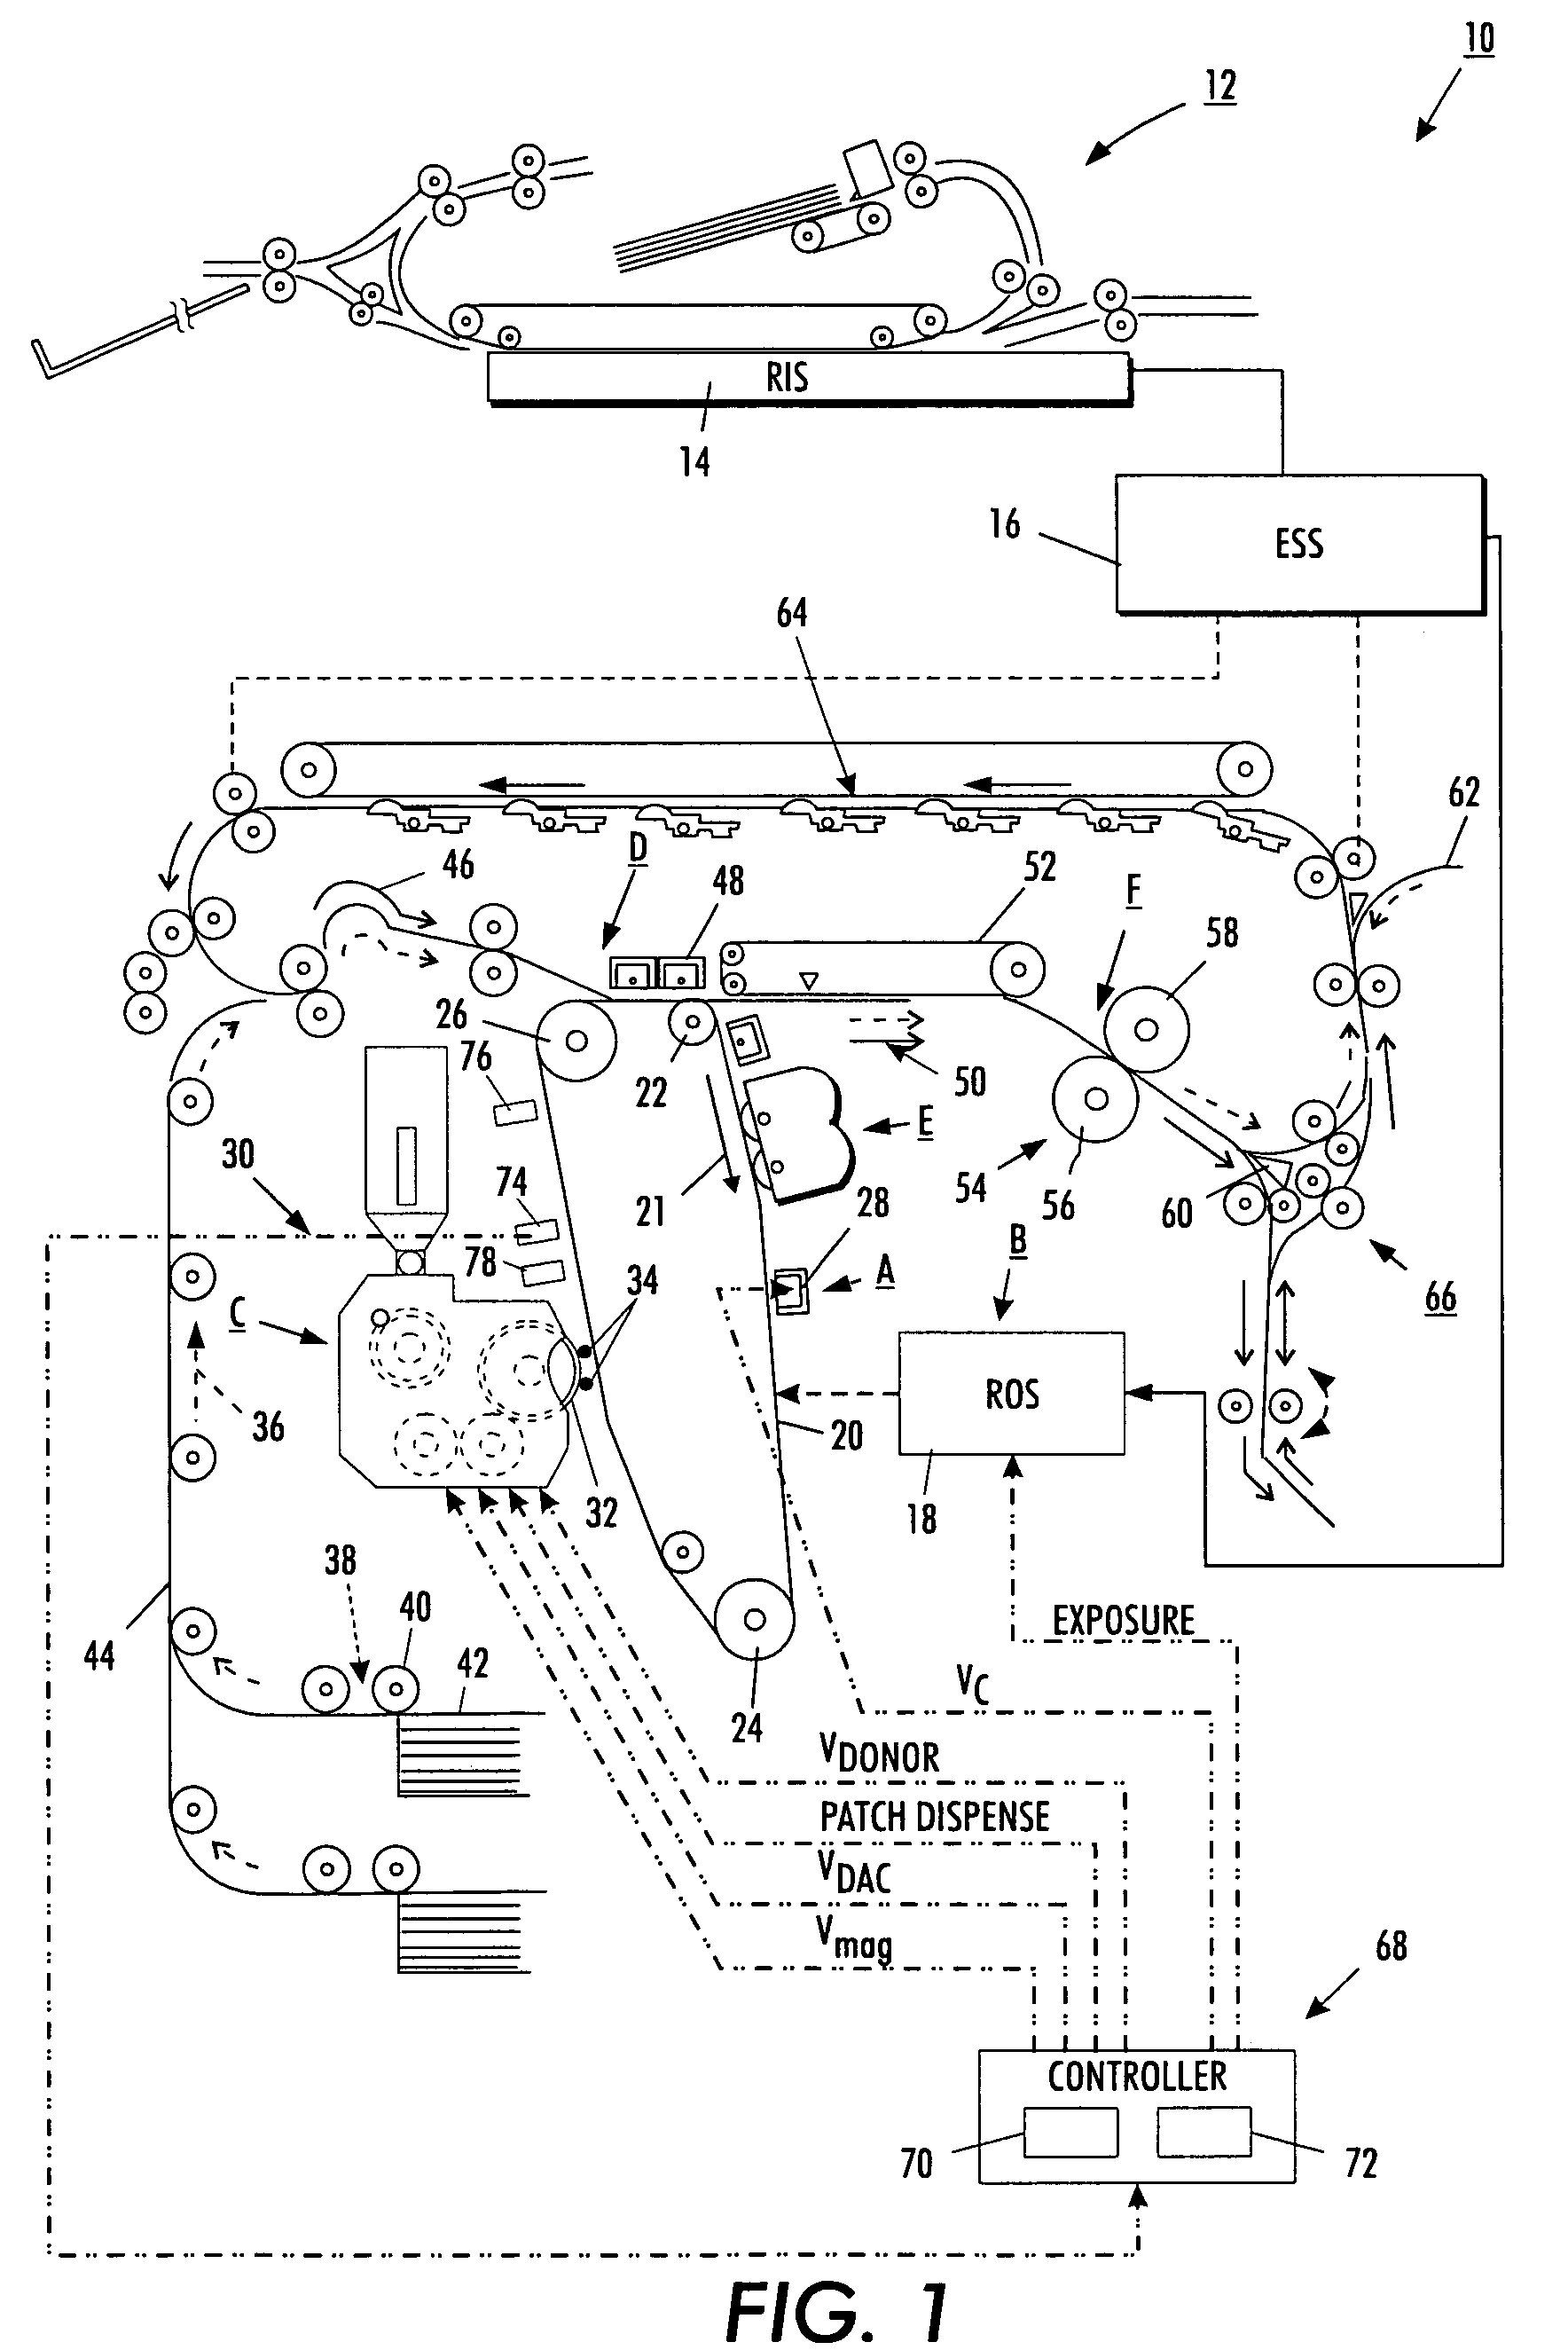 System and method for setup of toner concentration target for a toner concentration sensor